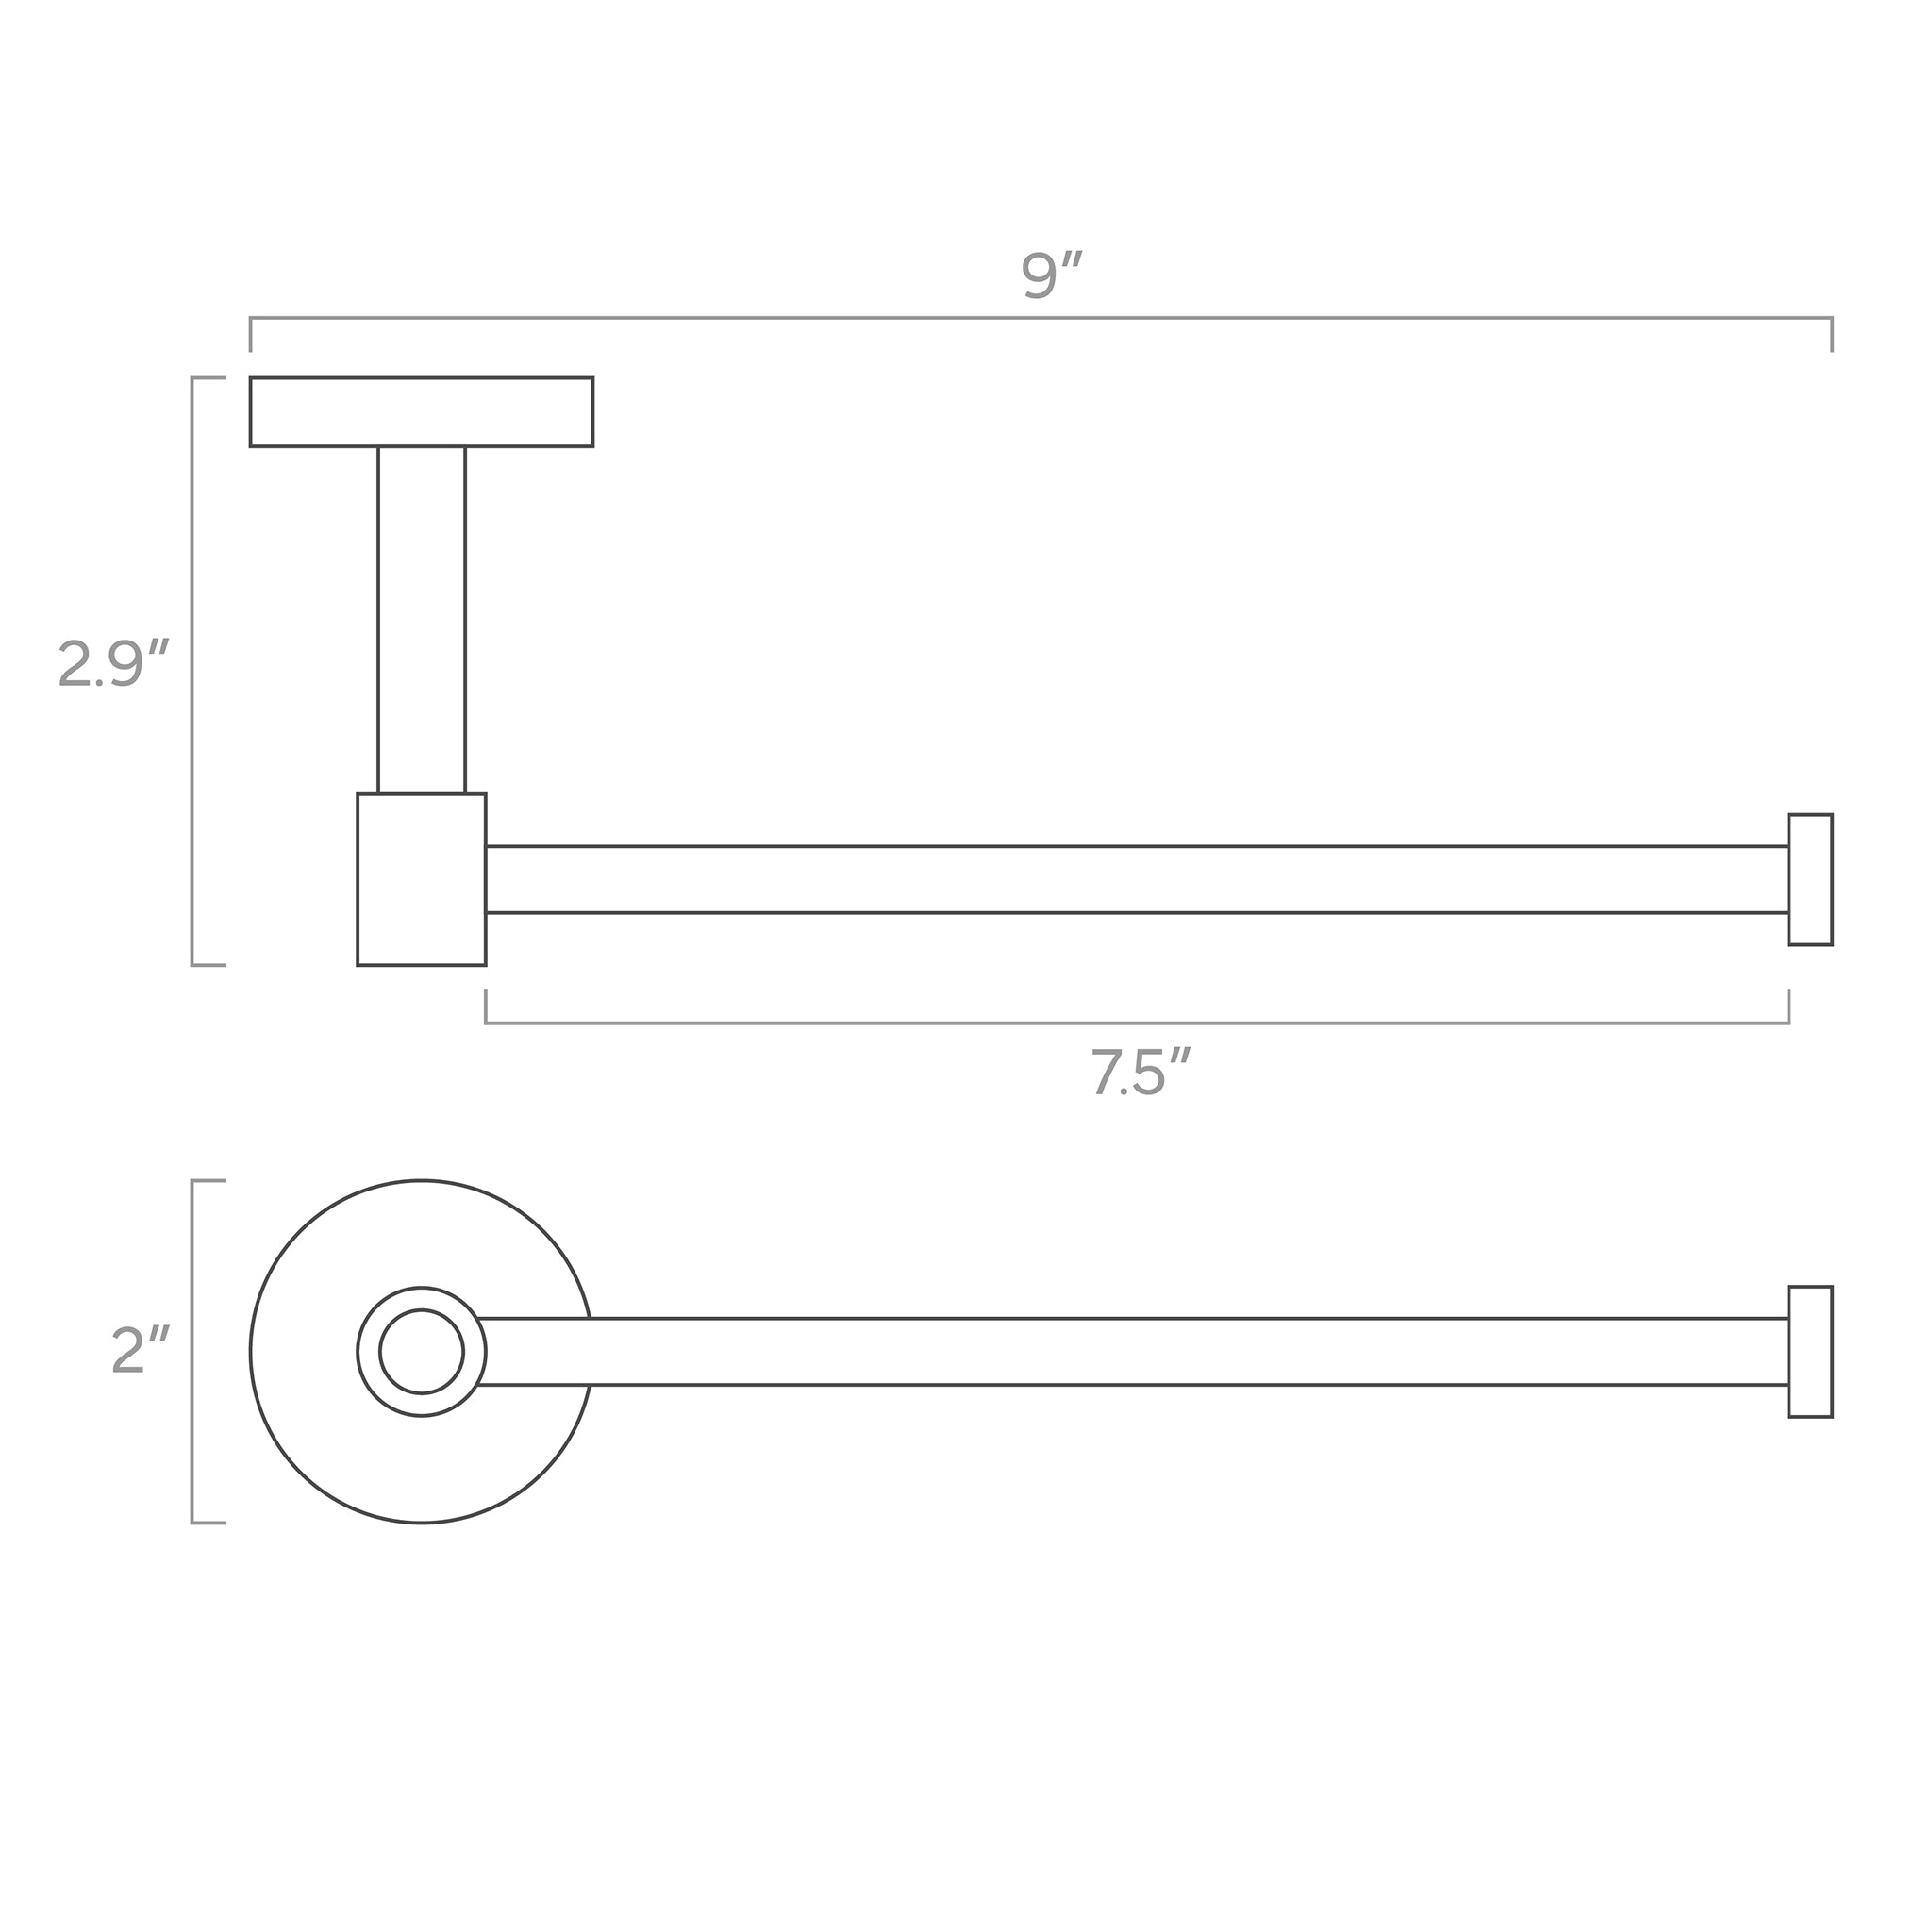 head hand towel bar ISO drawing, dutton brown hardware